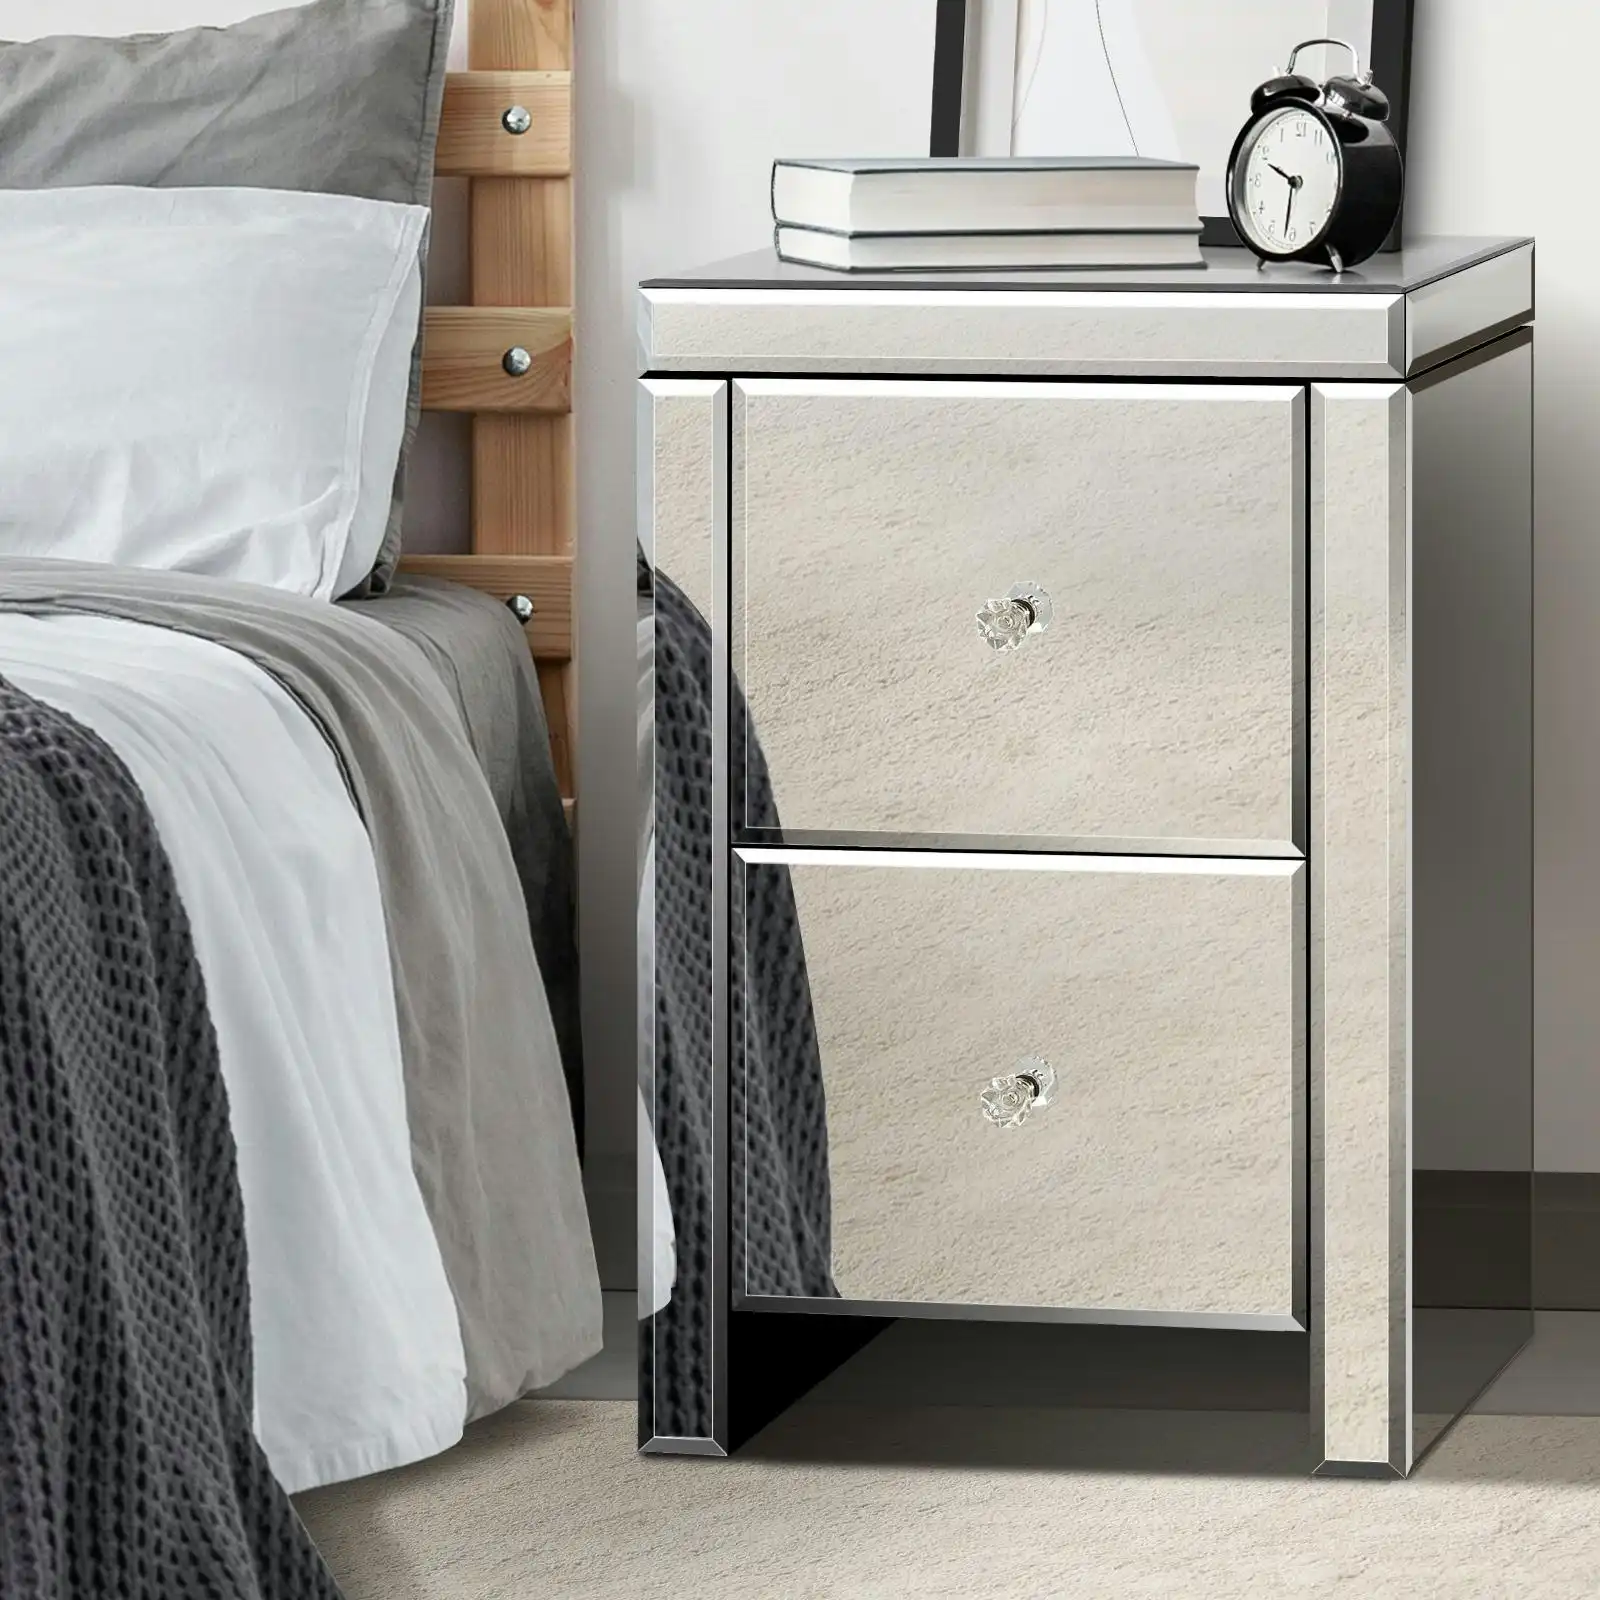 Oikiture Mirrored Storage Cabinet Bedside Table End Table w/ Acrylic Handles